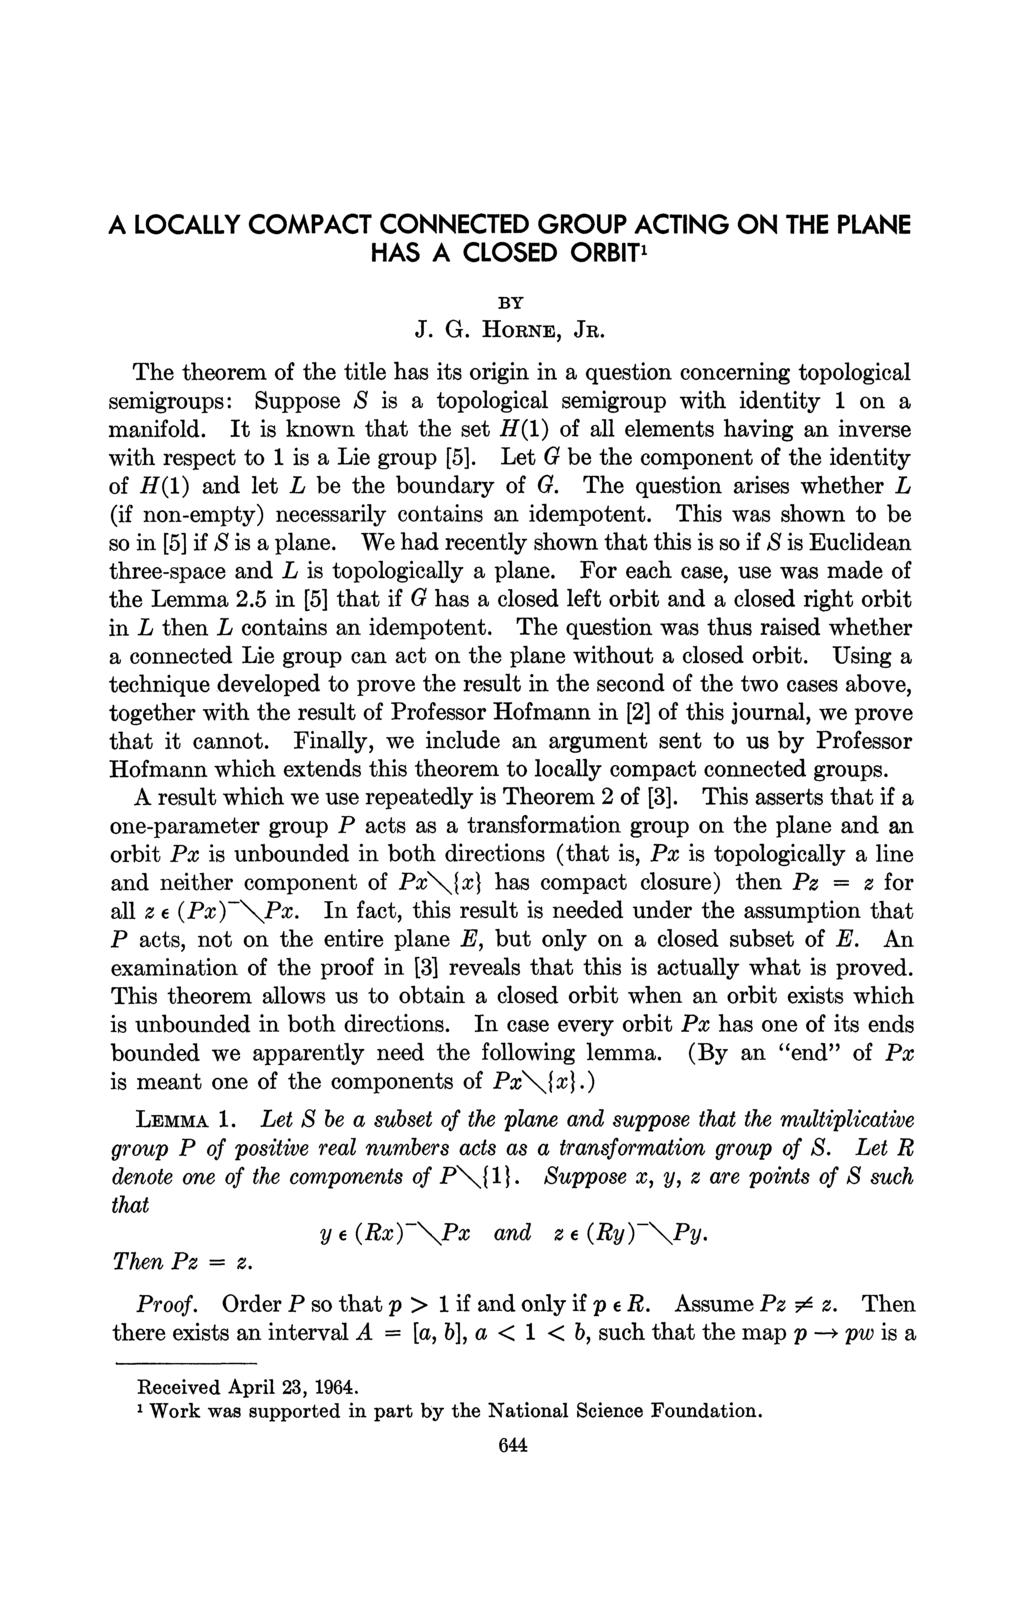 A LOCALLY COMPACT CONNECTED GROUP ACTING ON THE PLANE HAS A. CLOSED ORBIT BY J. HORNE, JR.